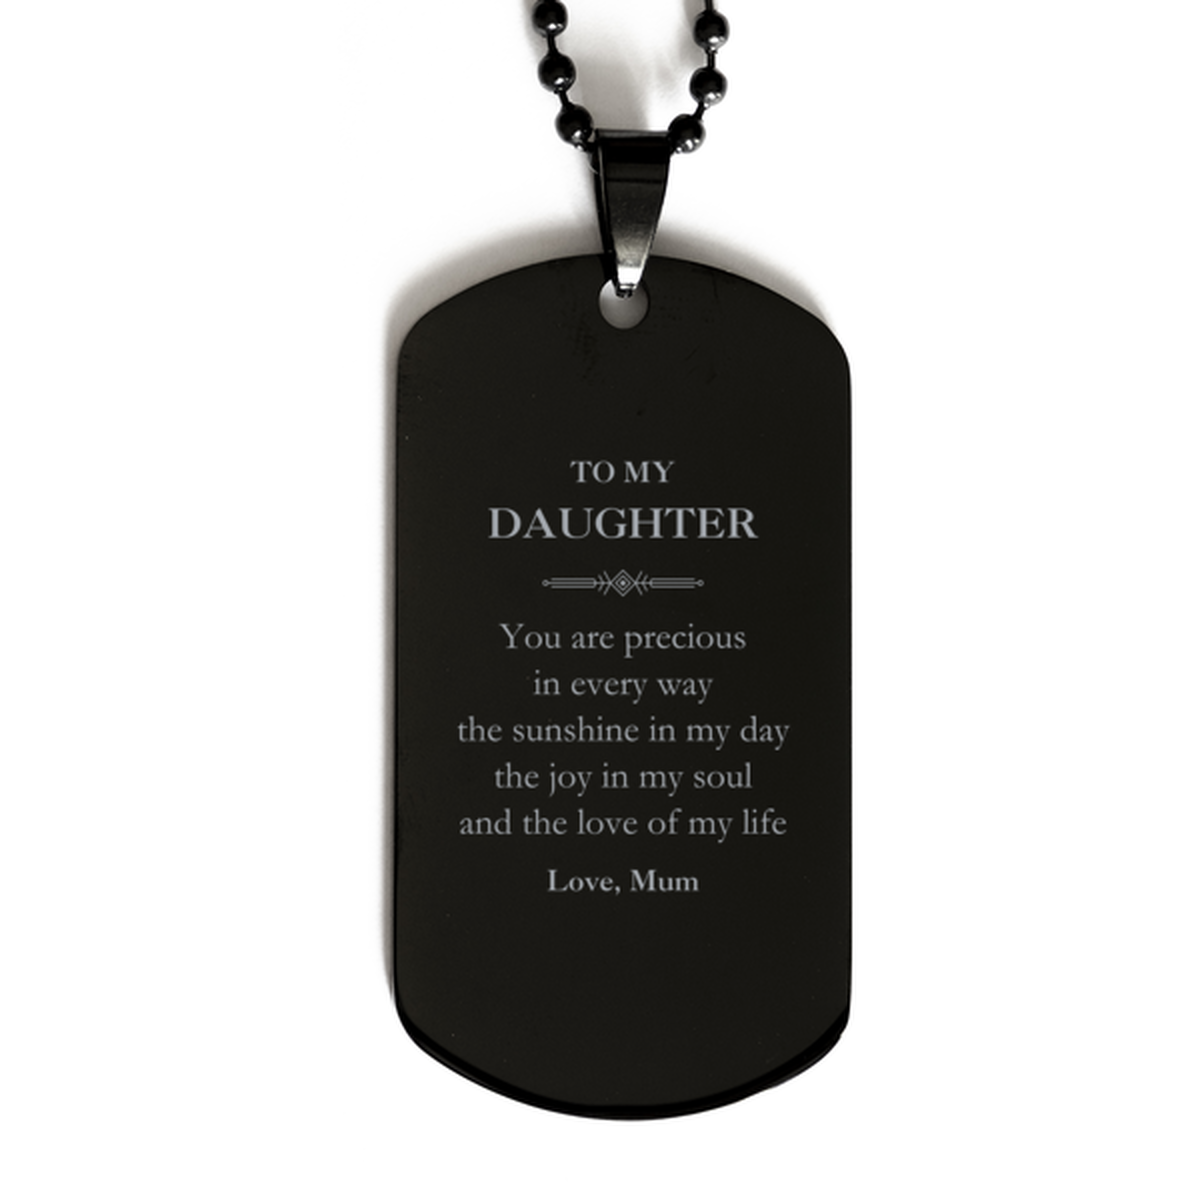 Graduation Gifts for Daughter Black Dog Tag Present from Mum, Christmas Daughter Birthday Gifts Daughter You are precious in every way the sunshine in my day. Love, Mum